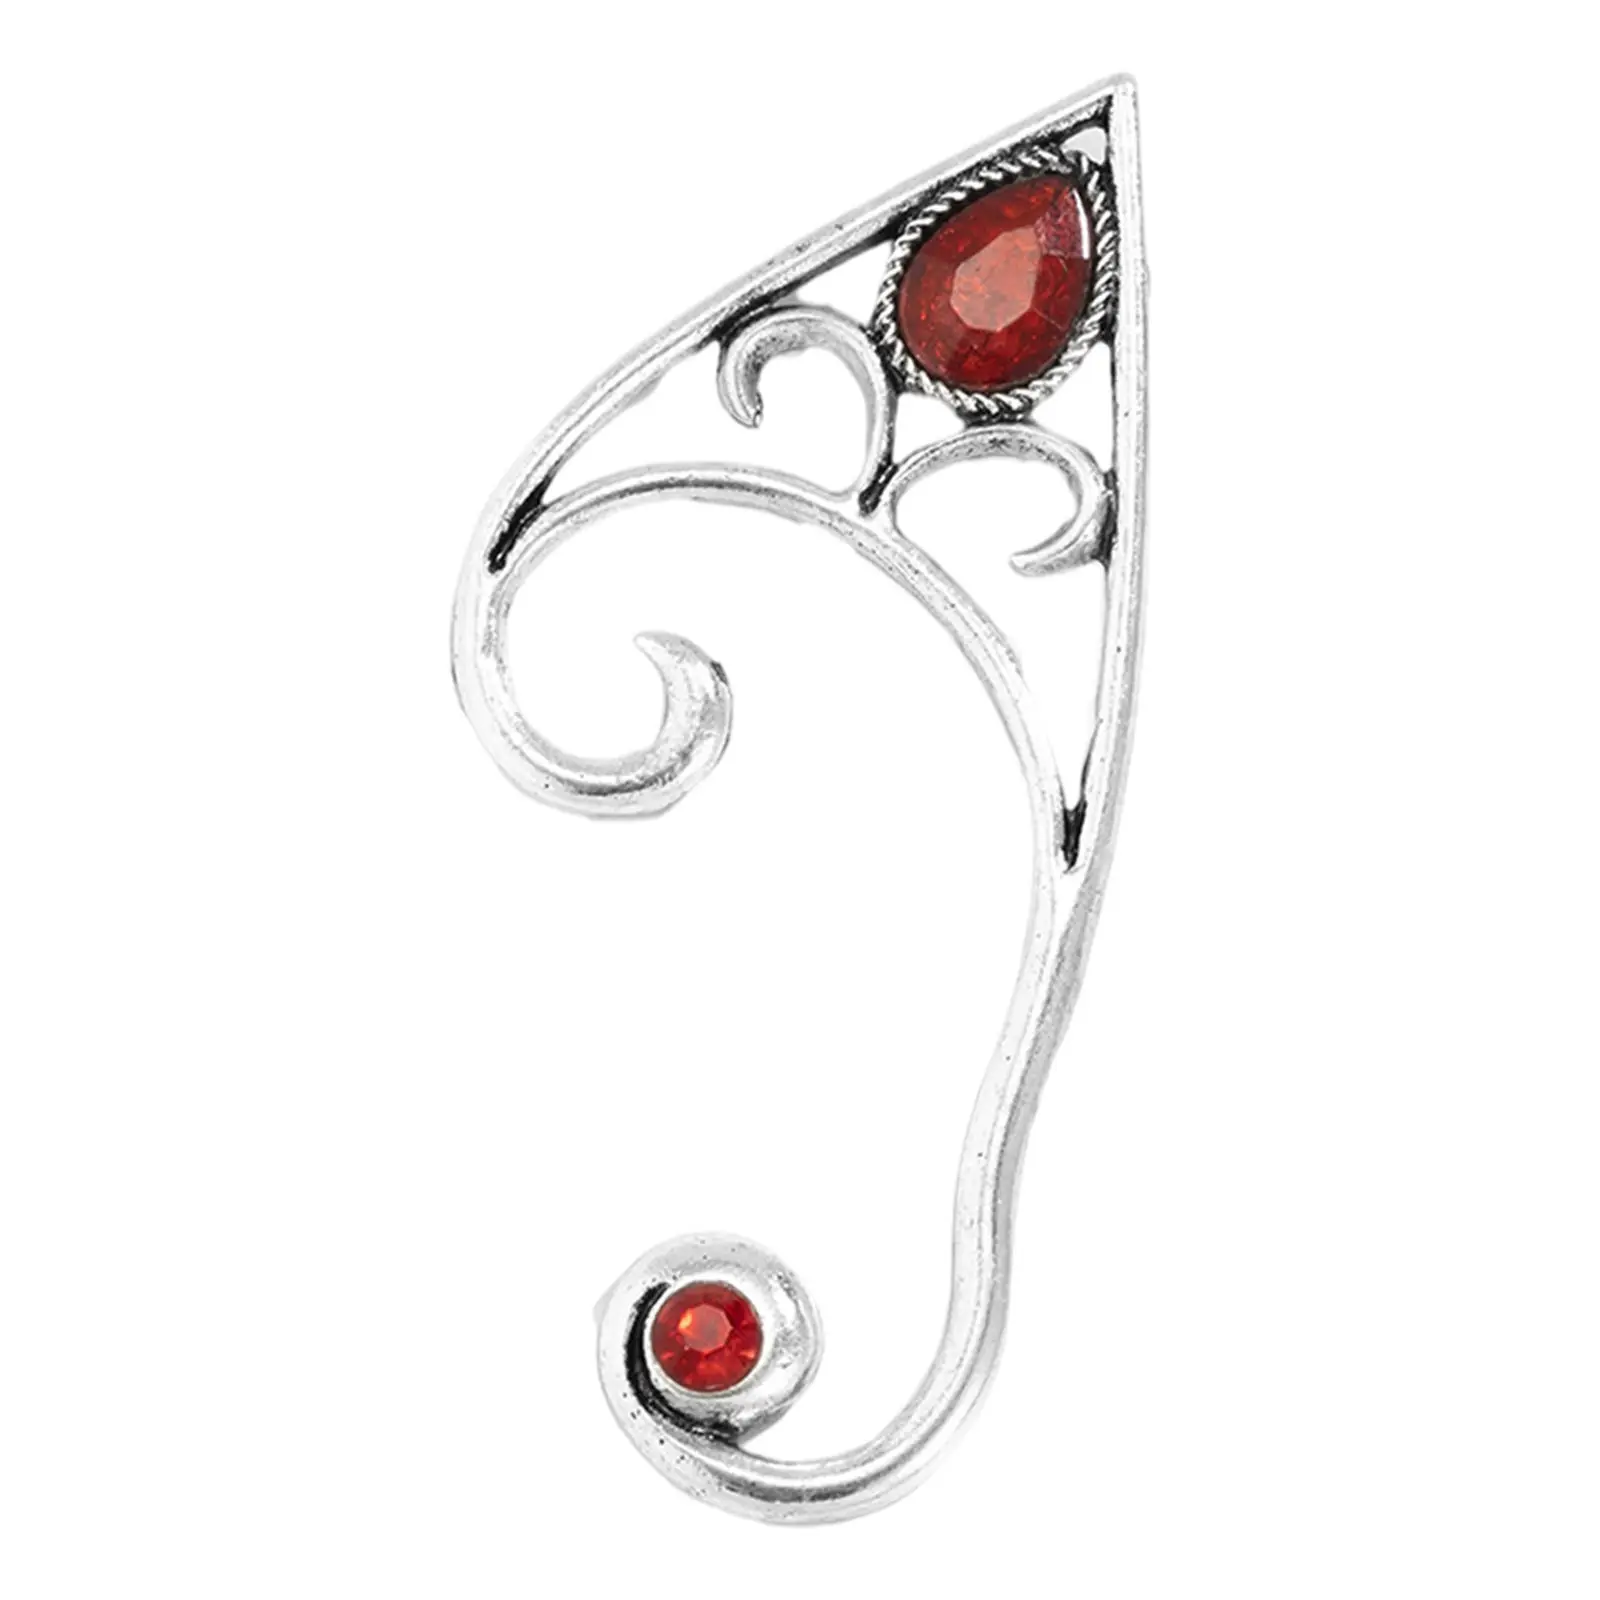 Alloy Creative Hollow Ear Cuff Left Ear Clip Clip-on Jewelry for Women Girls Silver for Halloween Costume Wedding Single